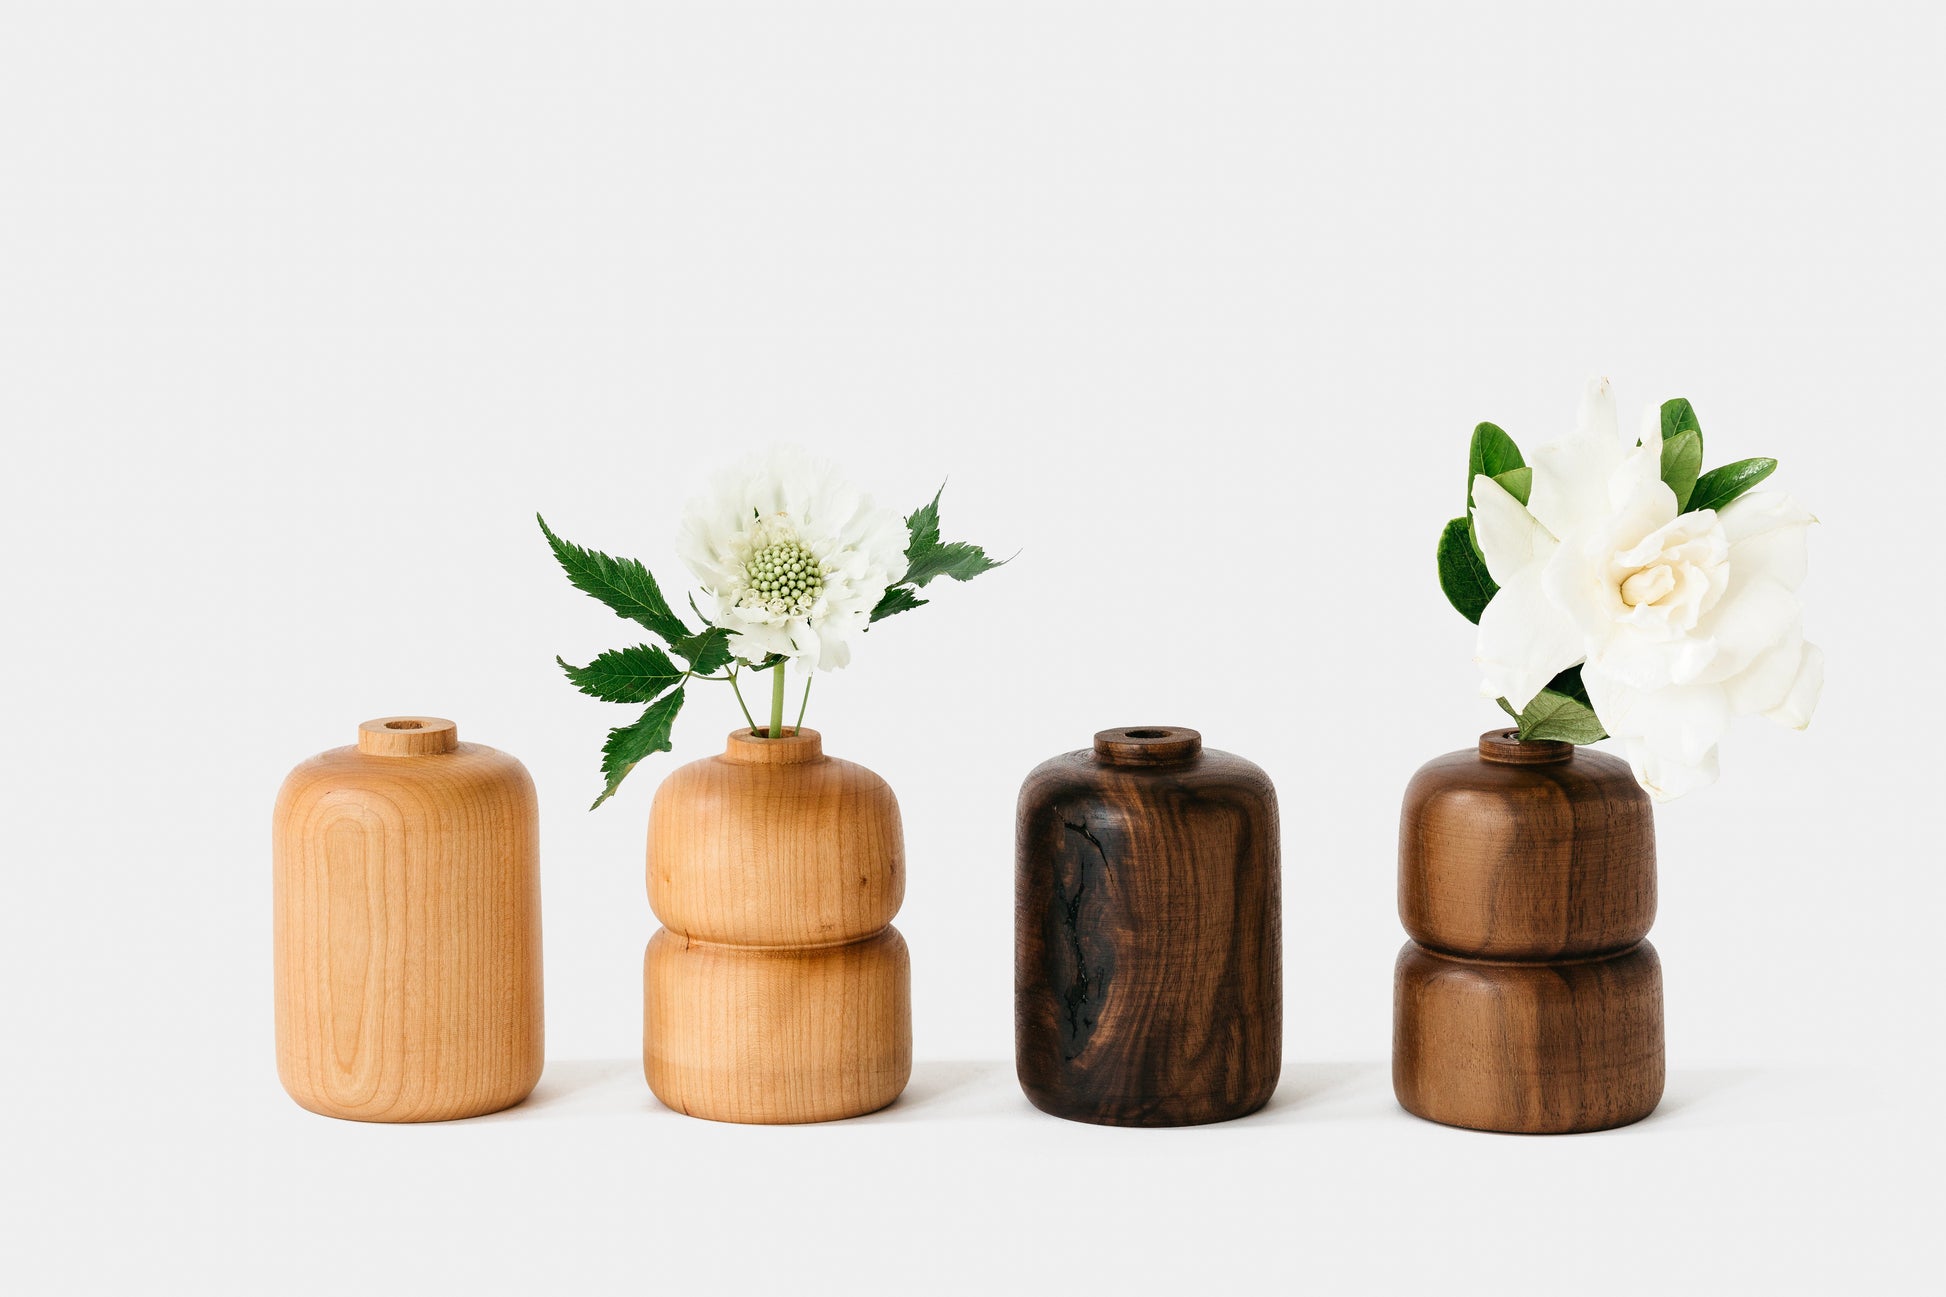 Collection of cherry and walnut bud vases with flowers. By Melanie Abrantes Designs